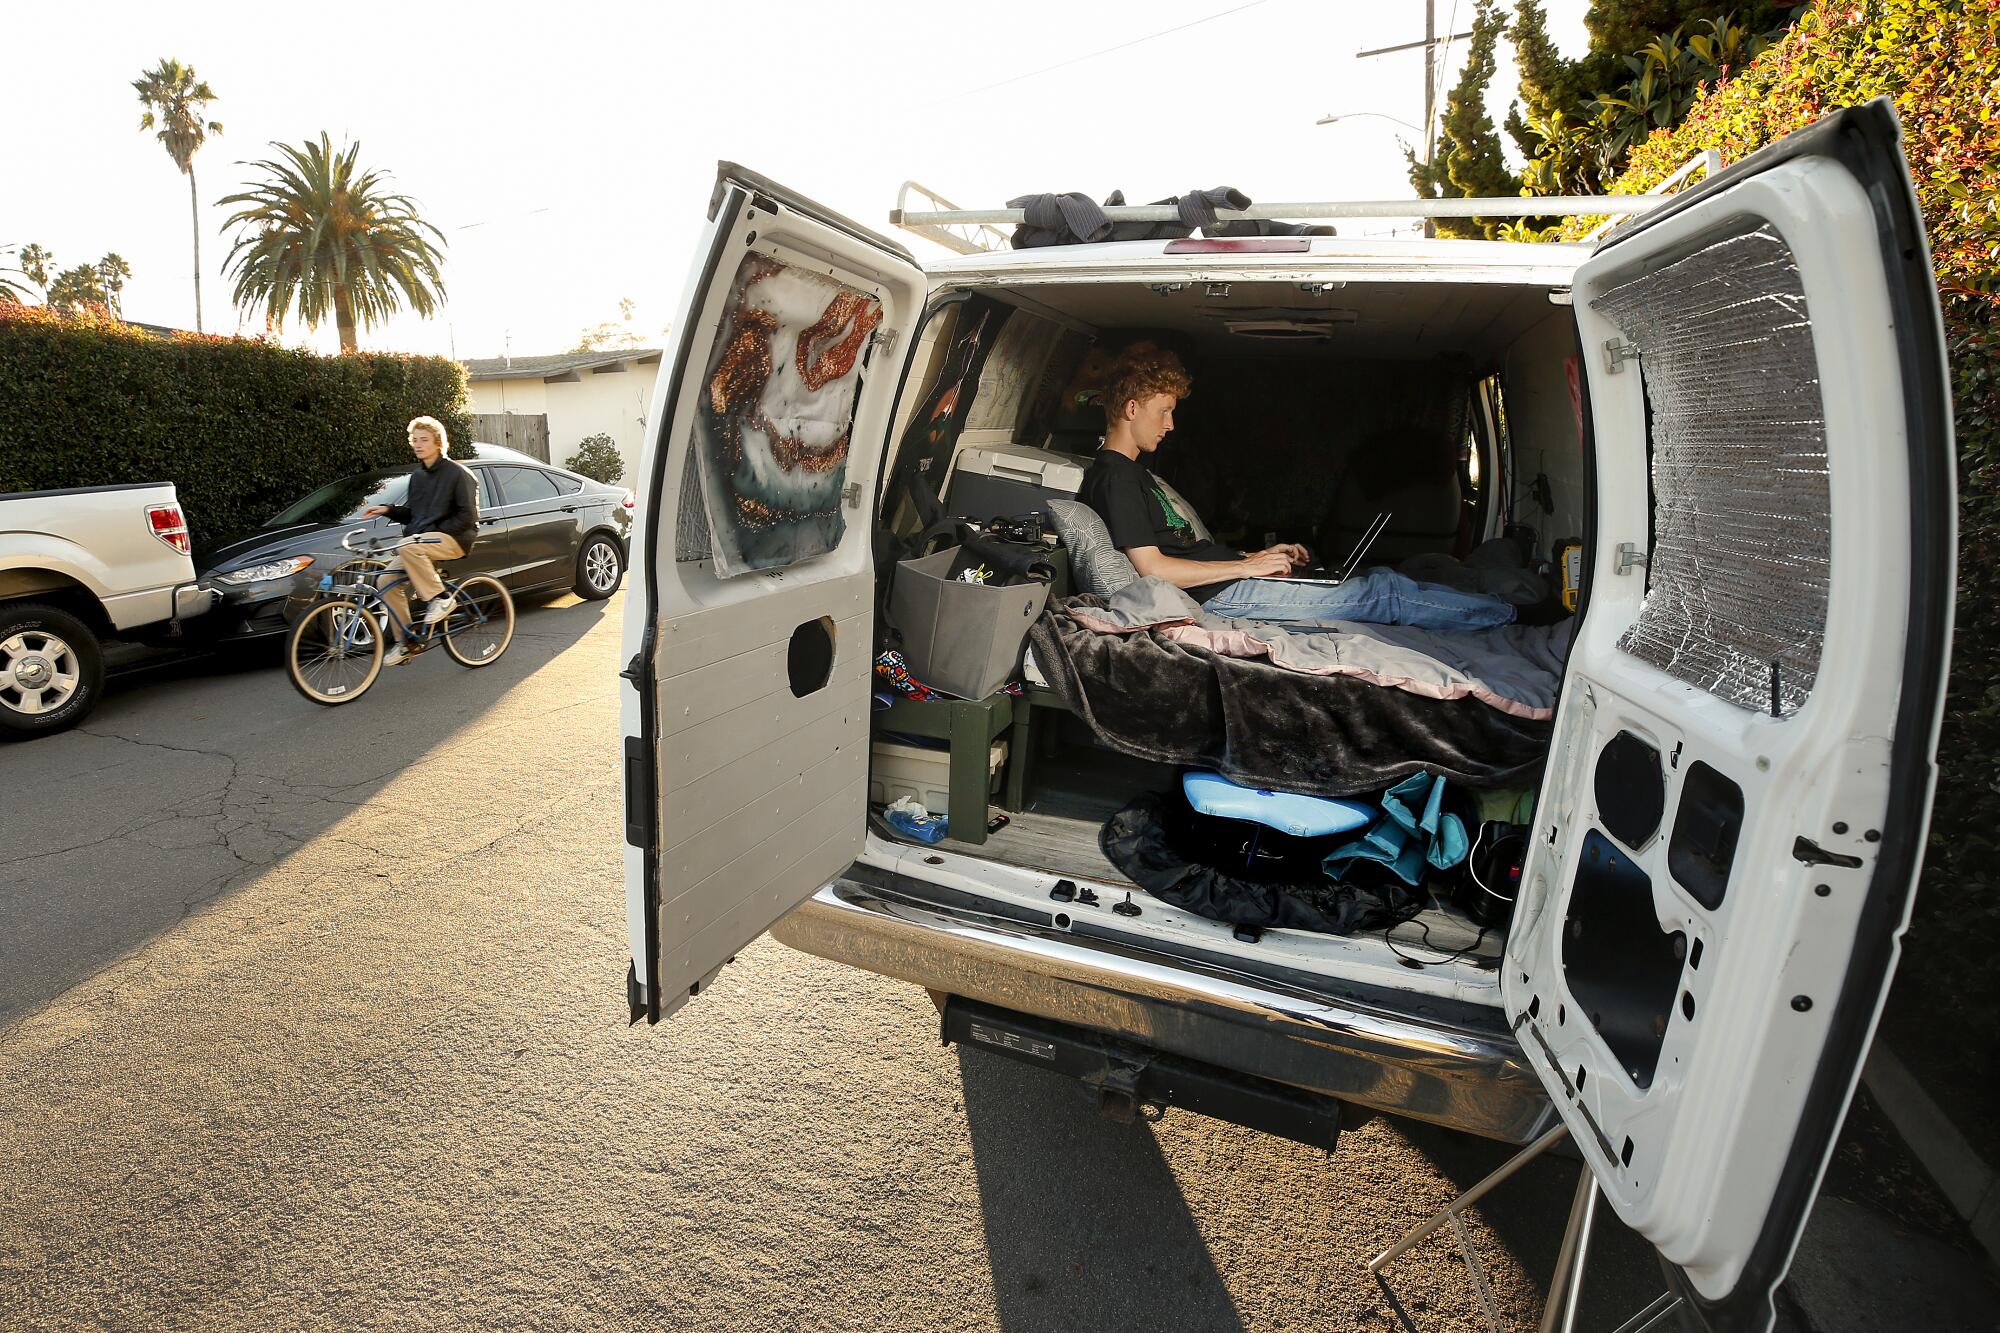 UCSB student Kris Hotchkiss sits in a van borrowed from a close friend. 